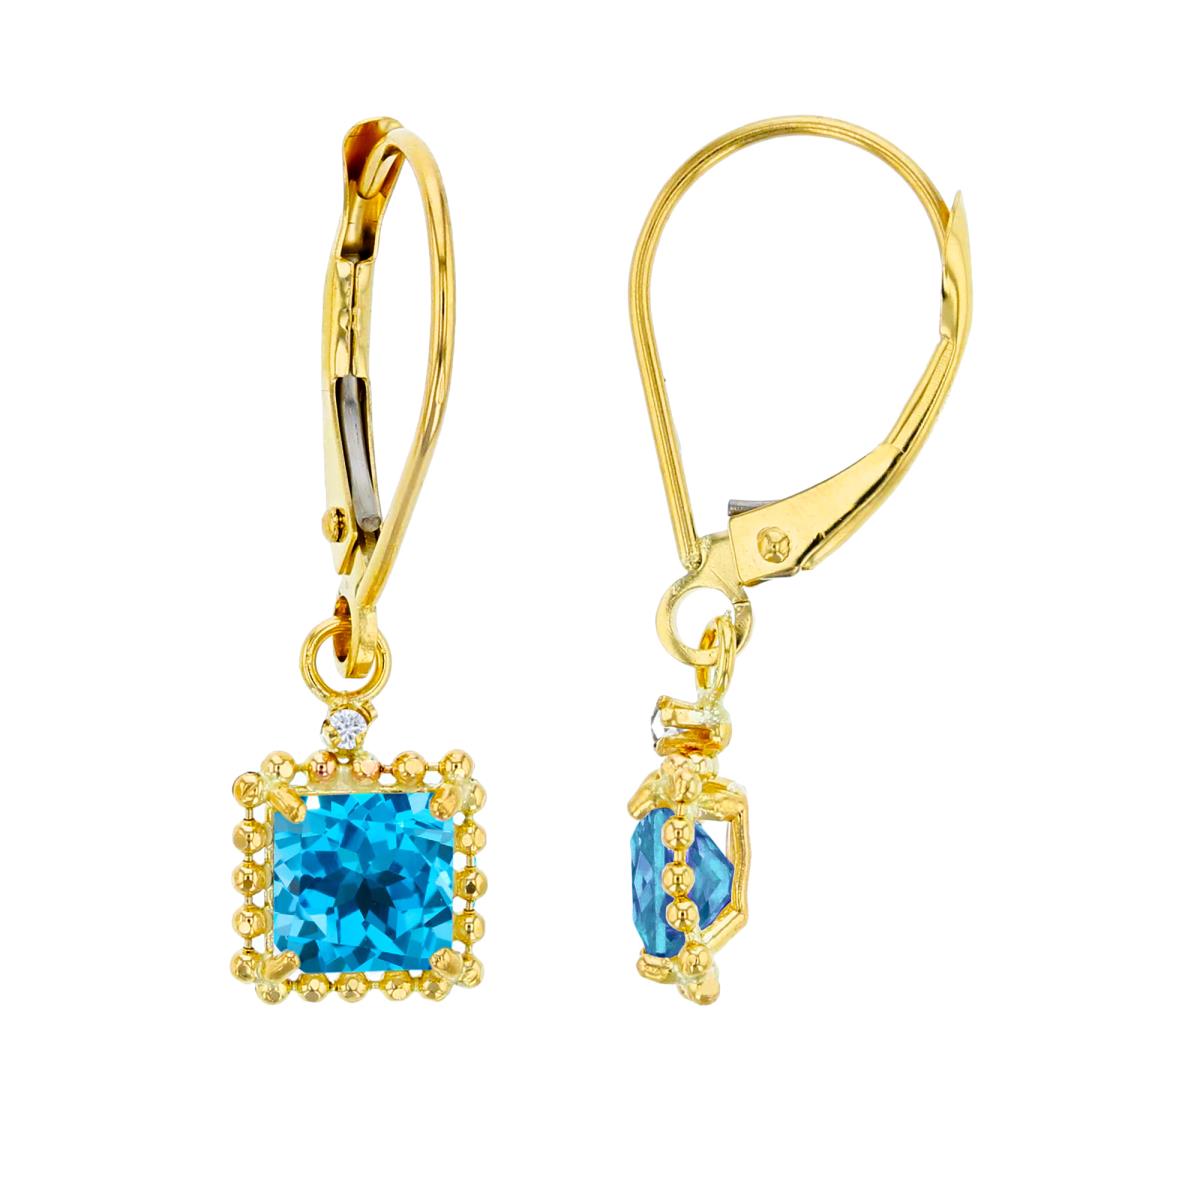 10K Yellow Gold 1.25mm Rd Created White Sapphire & 5mm Sq Swiss Blue Topaz Bead Frame Drop Lever-Back Earring